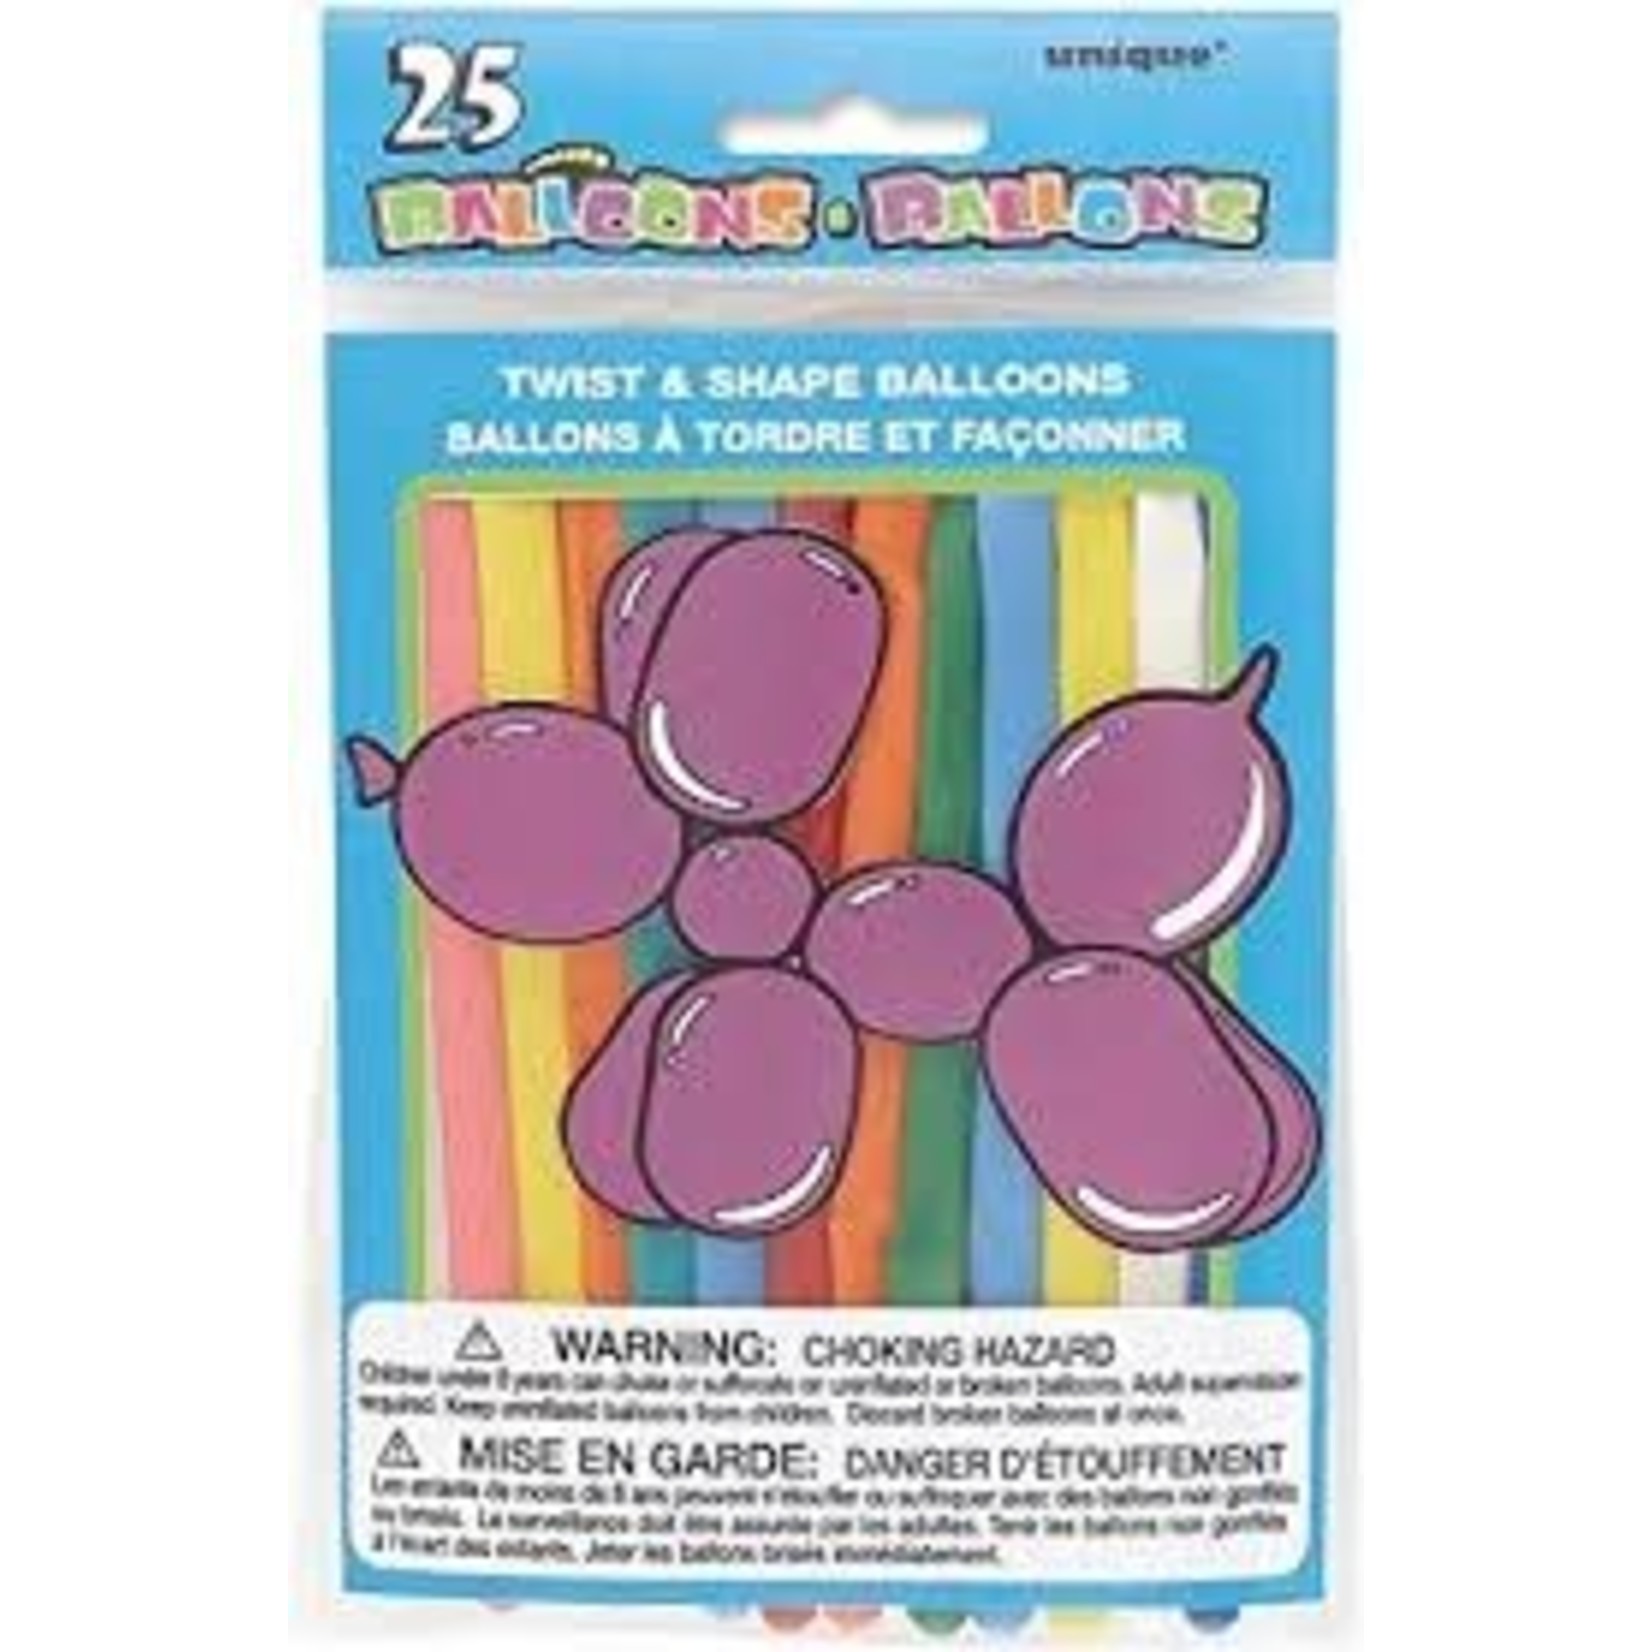 unique Twist and Shape Balloons - 25ct.